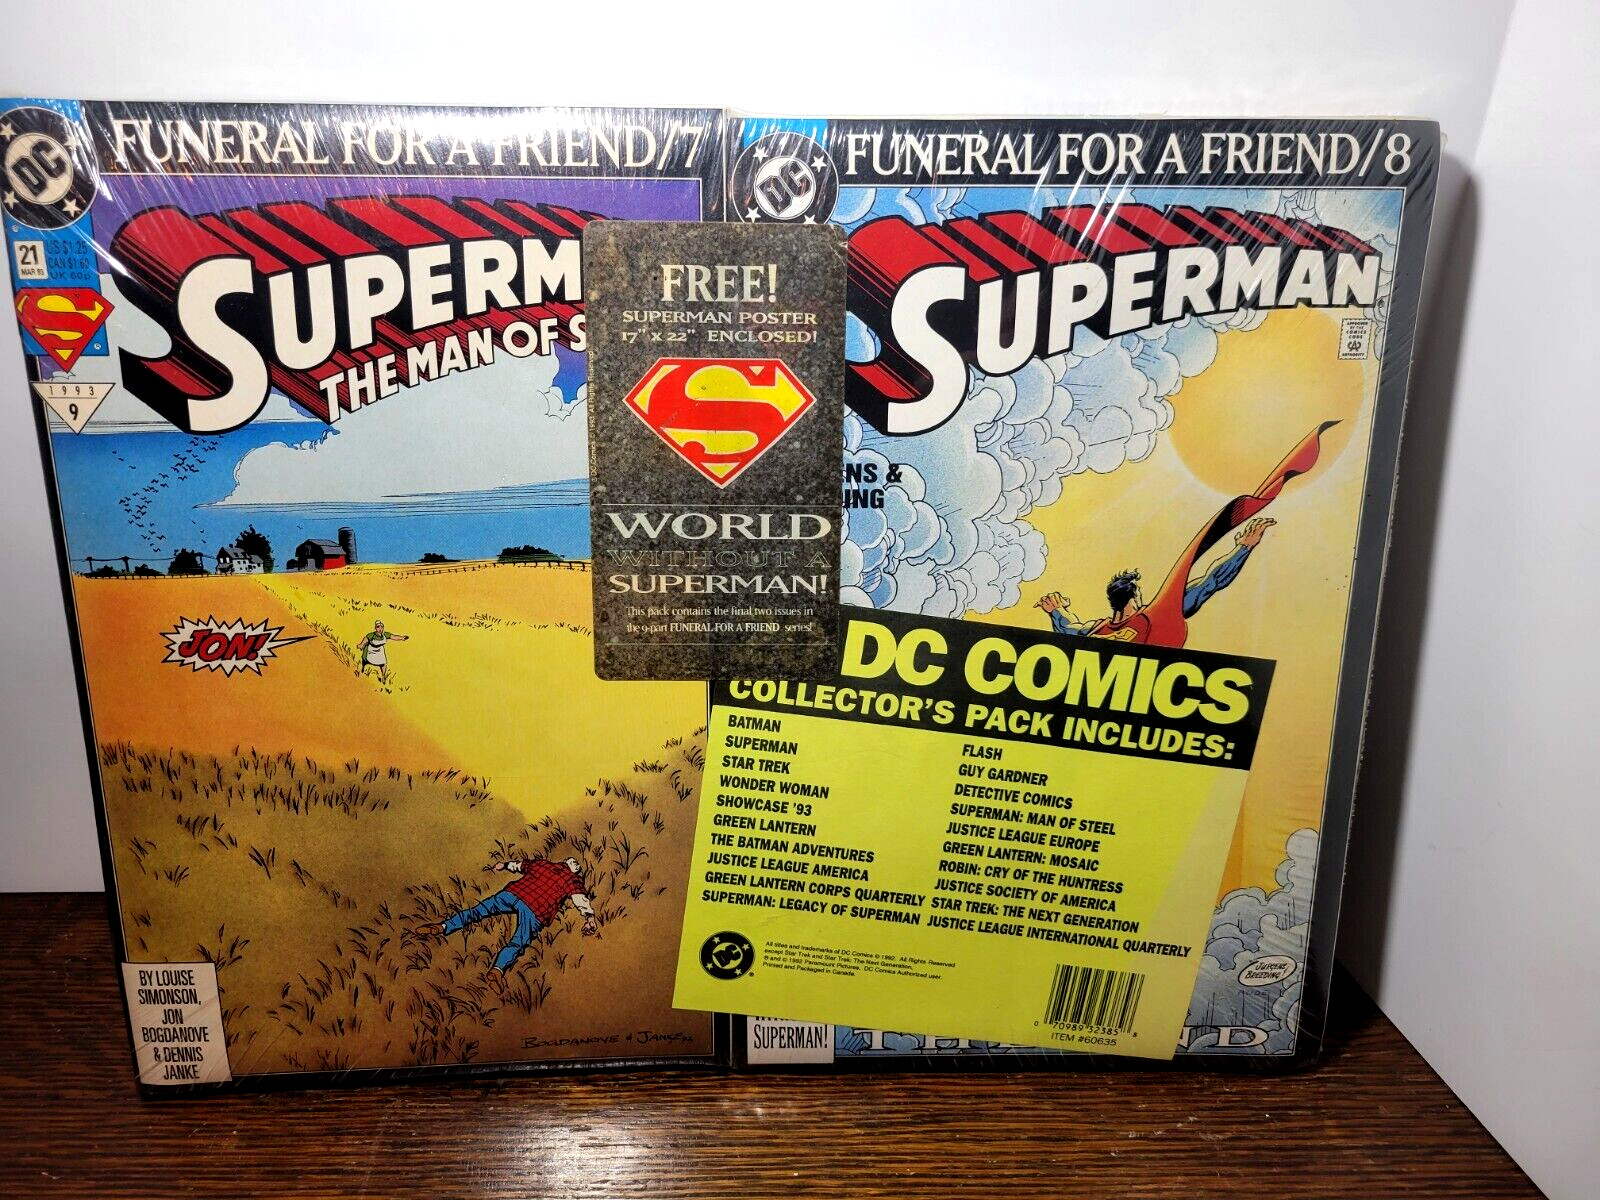 NEW SEALED- 20 DC Comics Collector\'s Pack Superman Funeral for a Friend Series